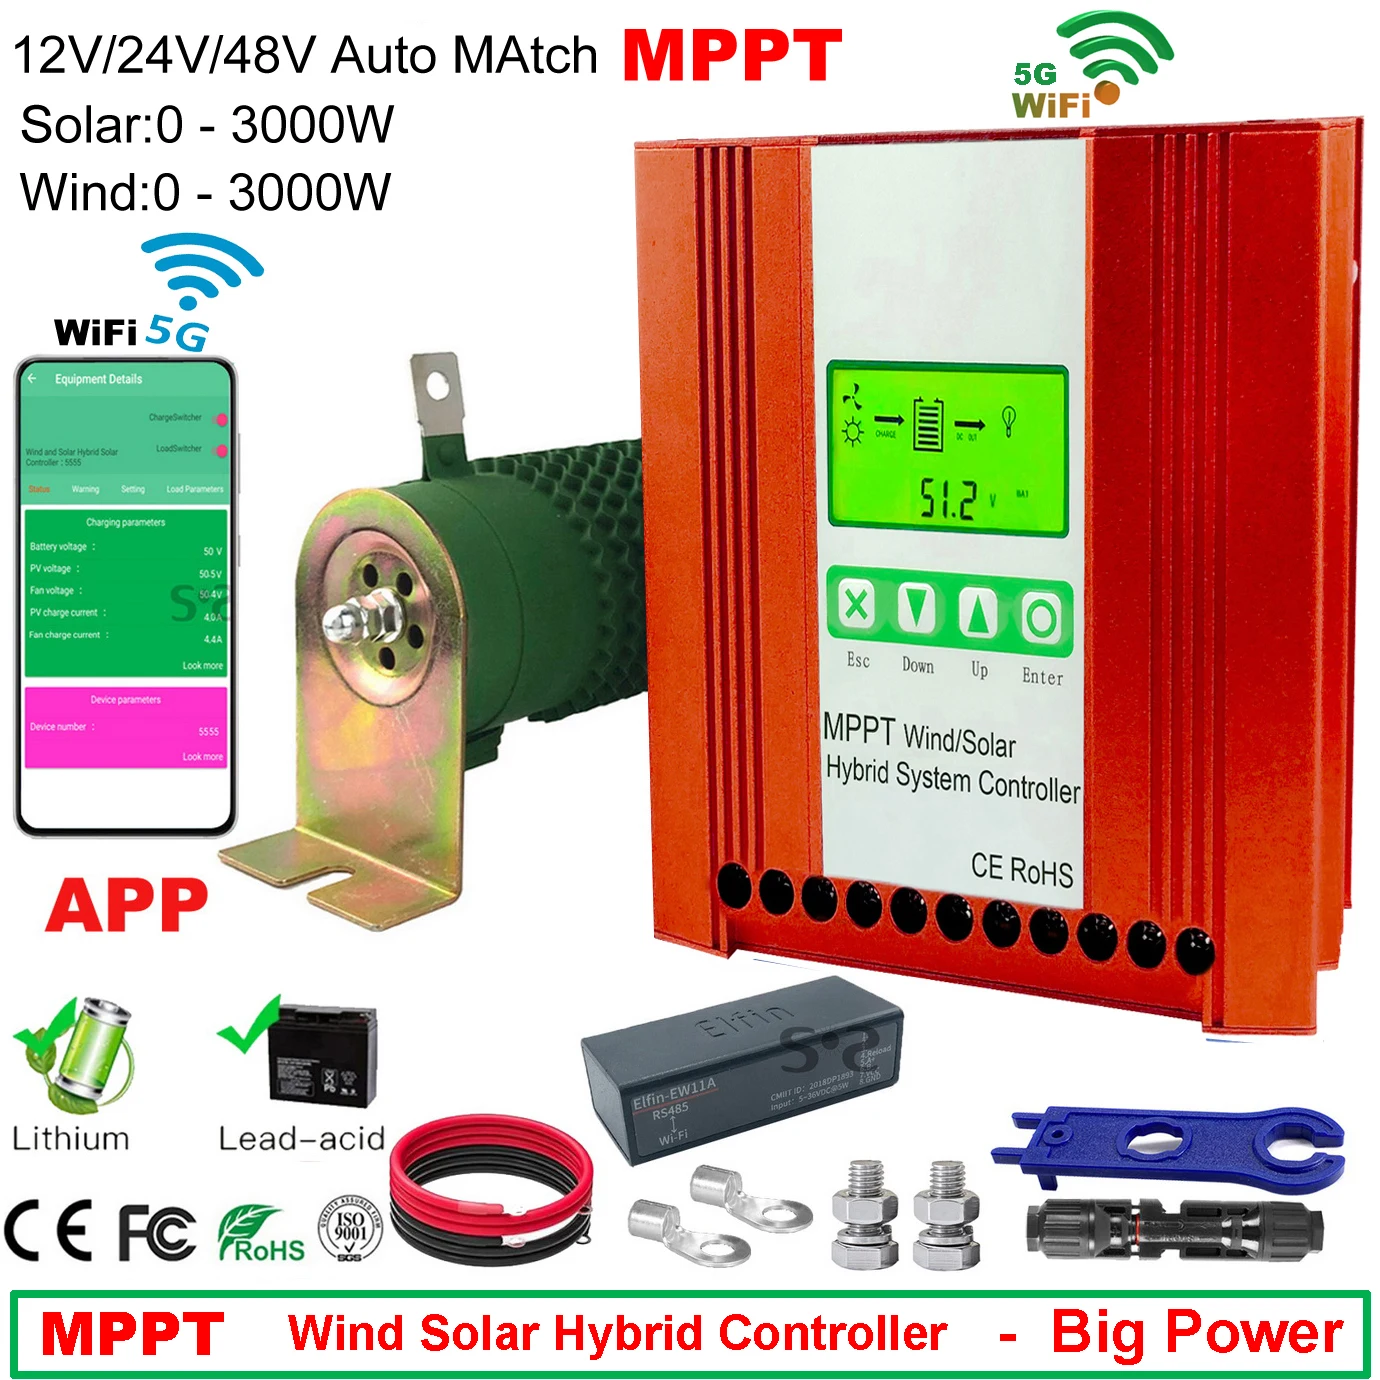 

5000W MPPT Hybrid Wind Solar Charge Discharge Booster Controller WIFI Monitor For 12V 24V 48V Lifepo4 Lithium Lead Acid Battery